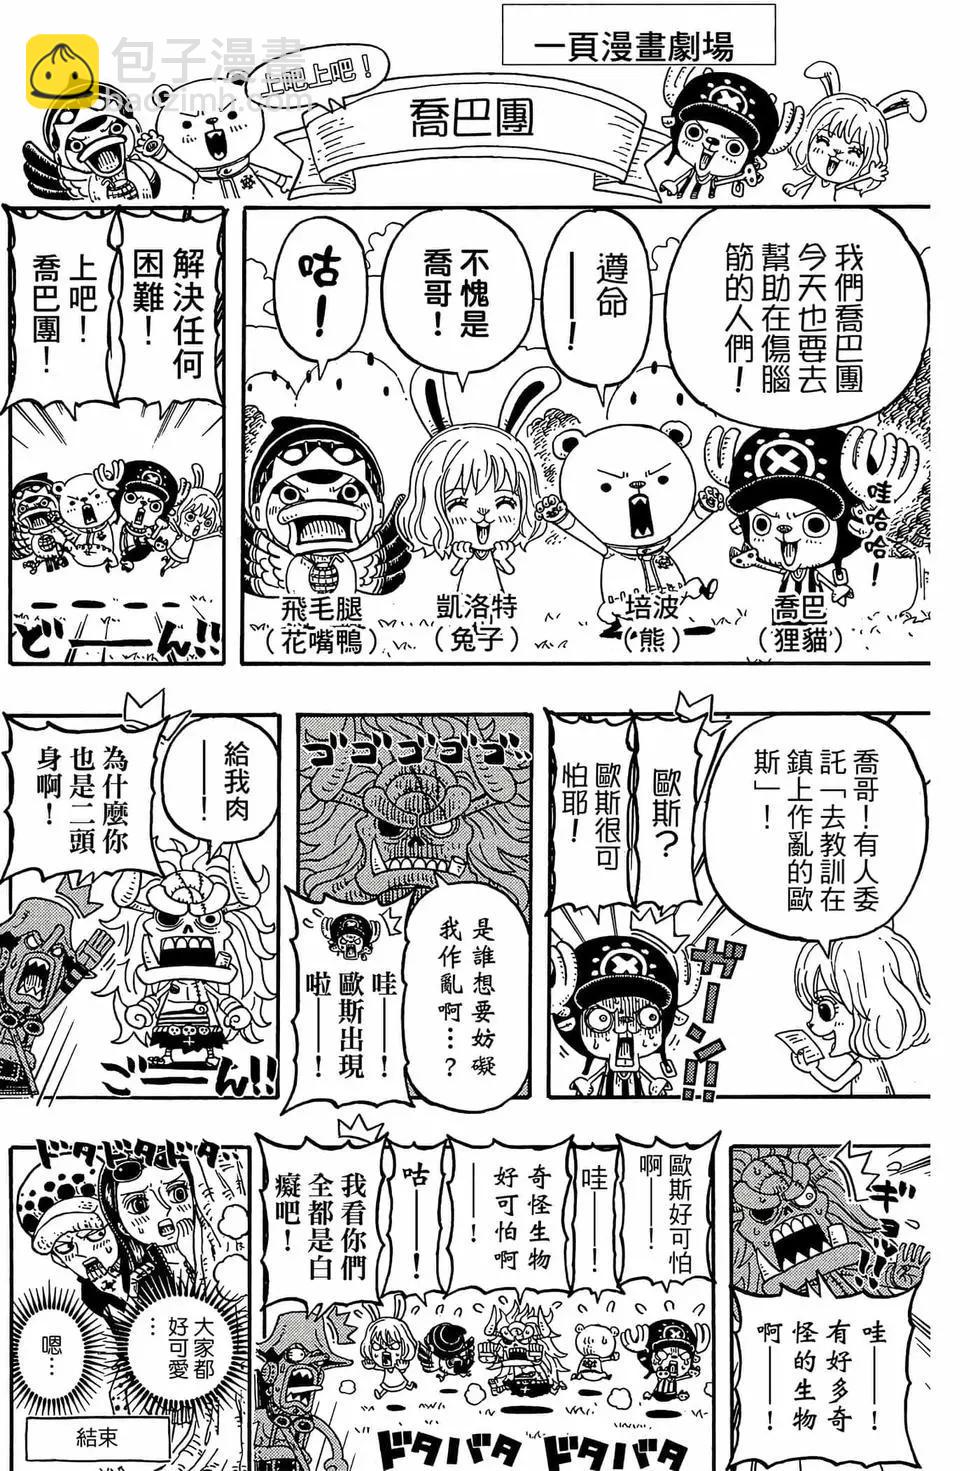 One piece party - 第03卷(1/4) - 6